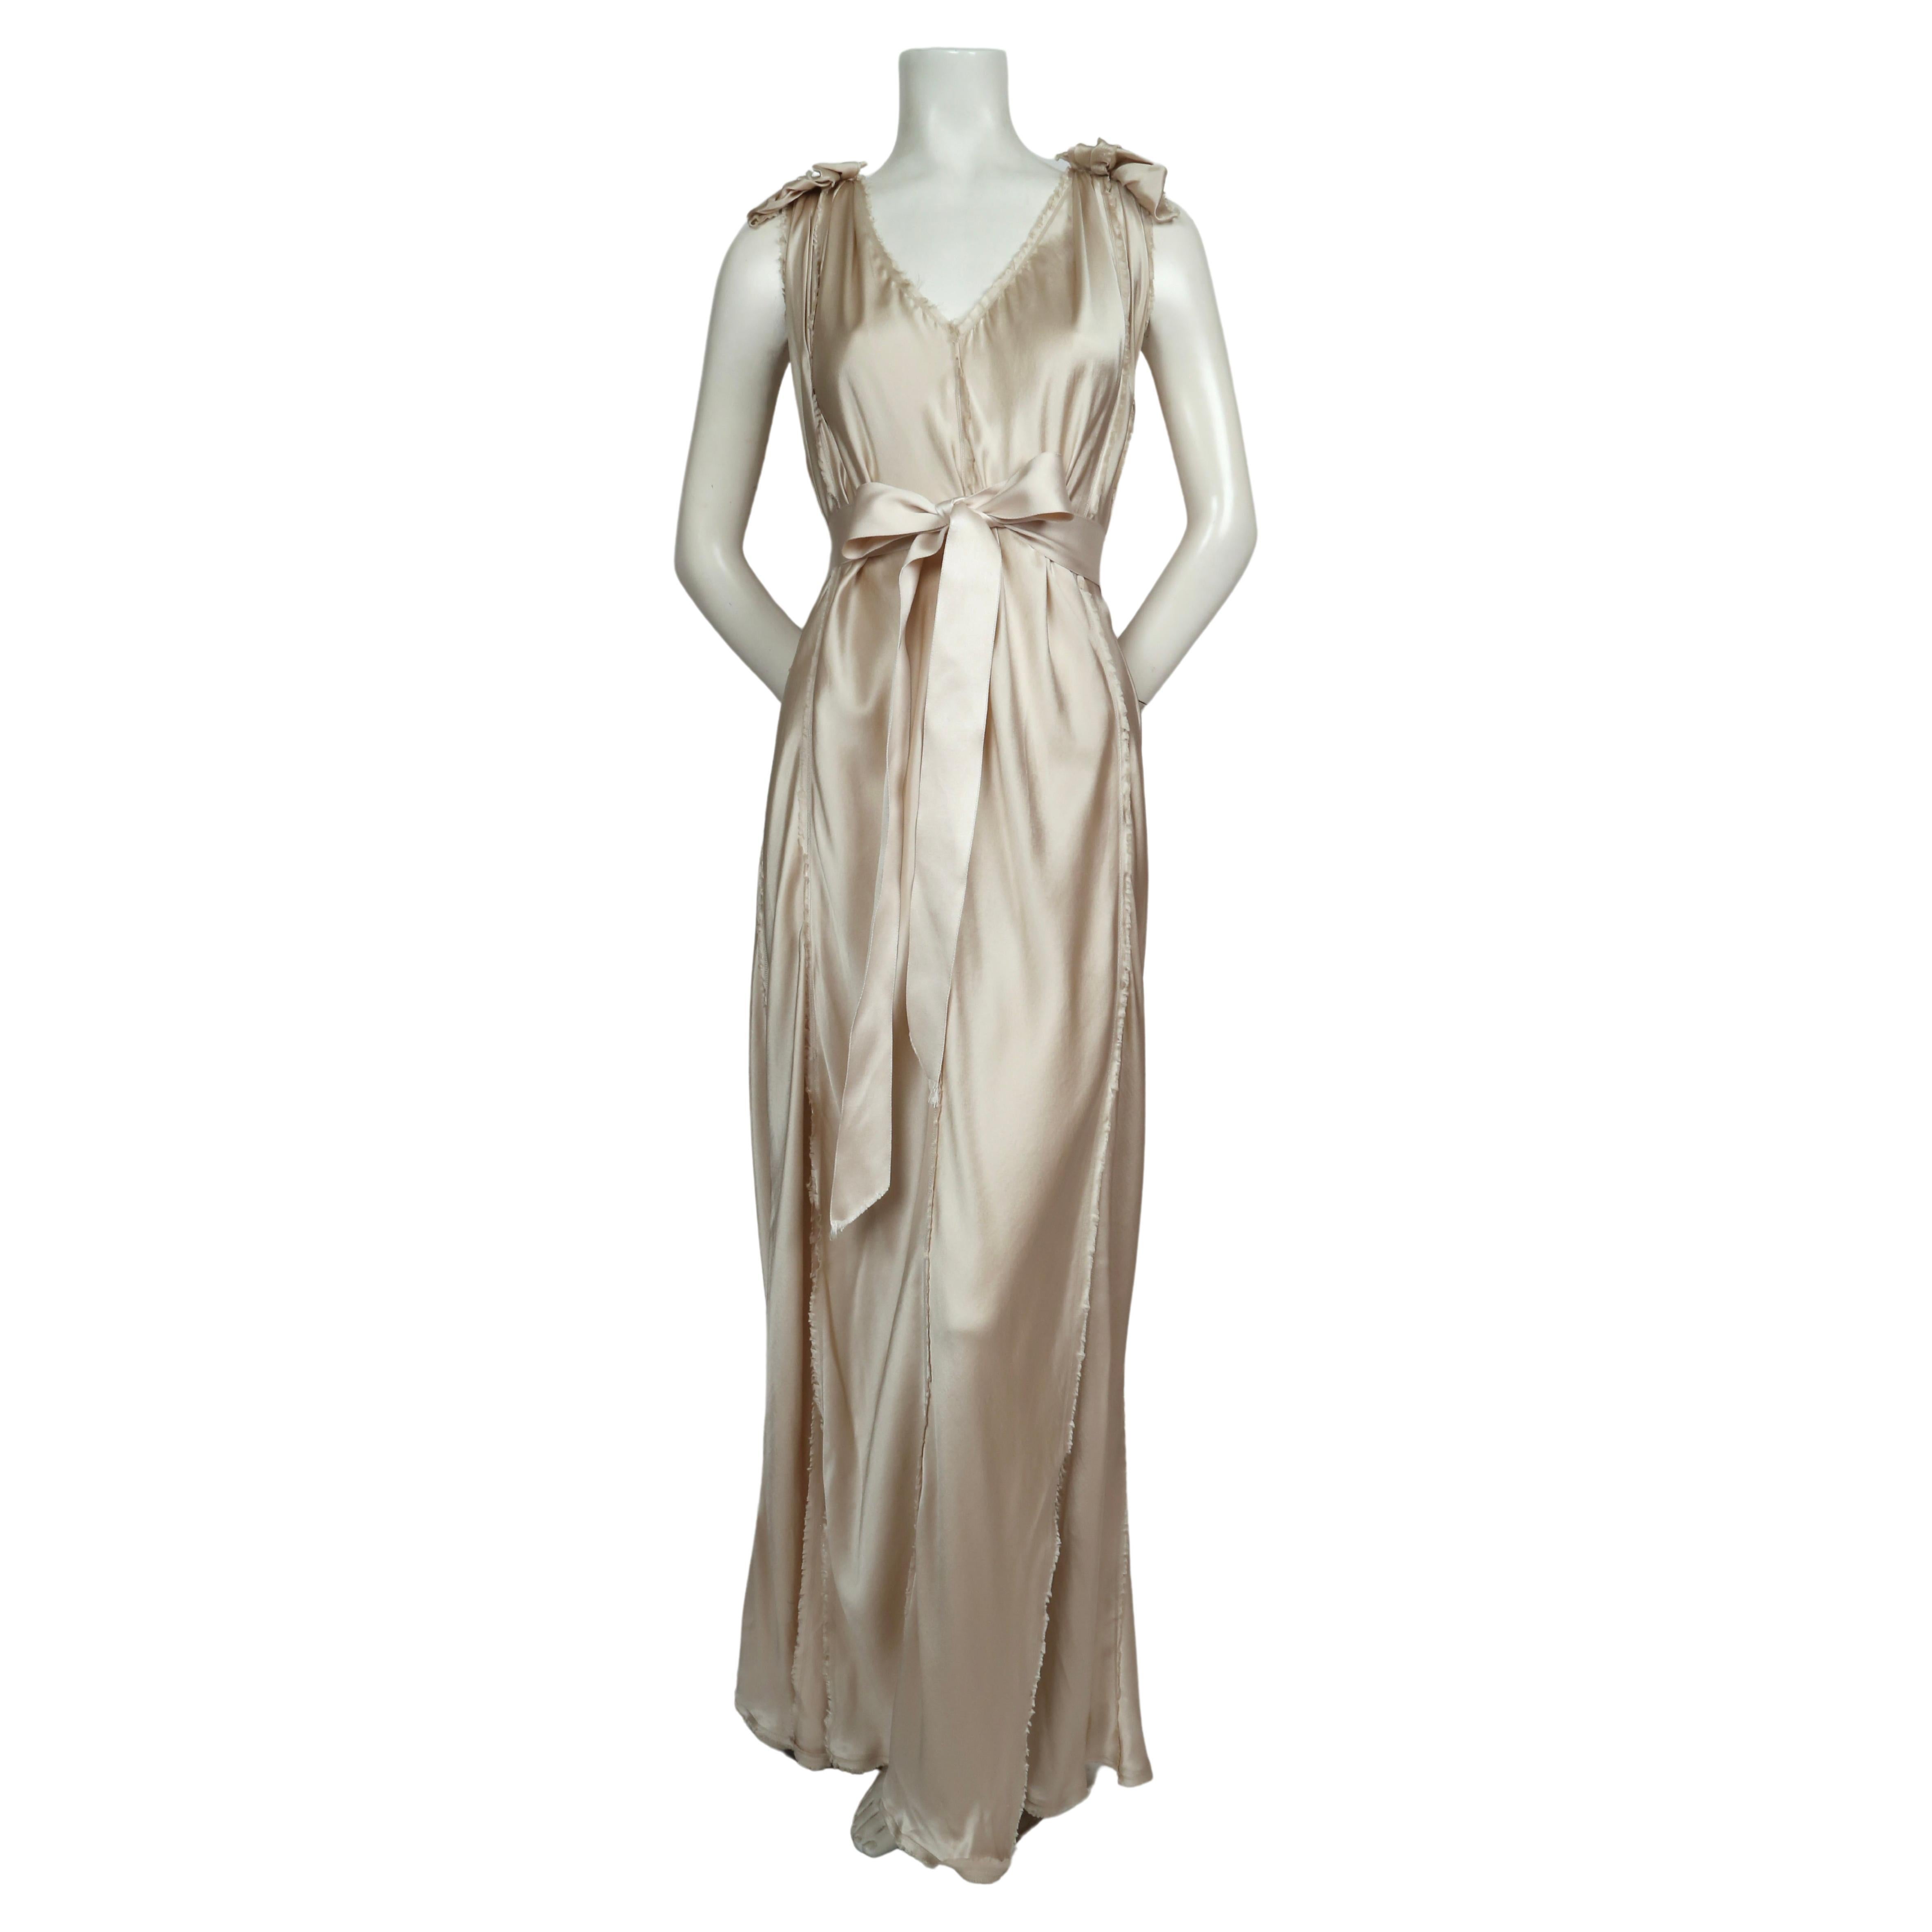 Champagne silk Grecian style wedding  gown designed by Alber Elbaz for Lanvin dating to 2008. French size 36 however there is some flexibility in sizing due to the bias cut of the panels.  Intentionally frayed edges. Net detail at top of shoulders.